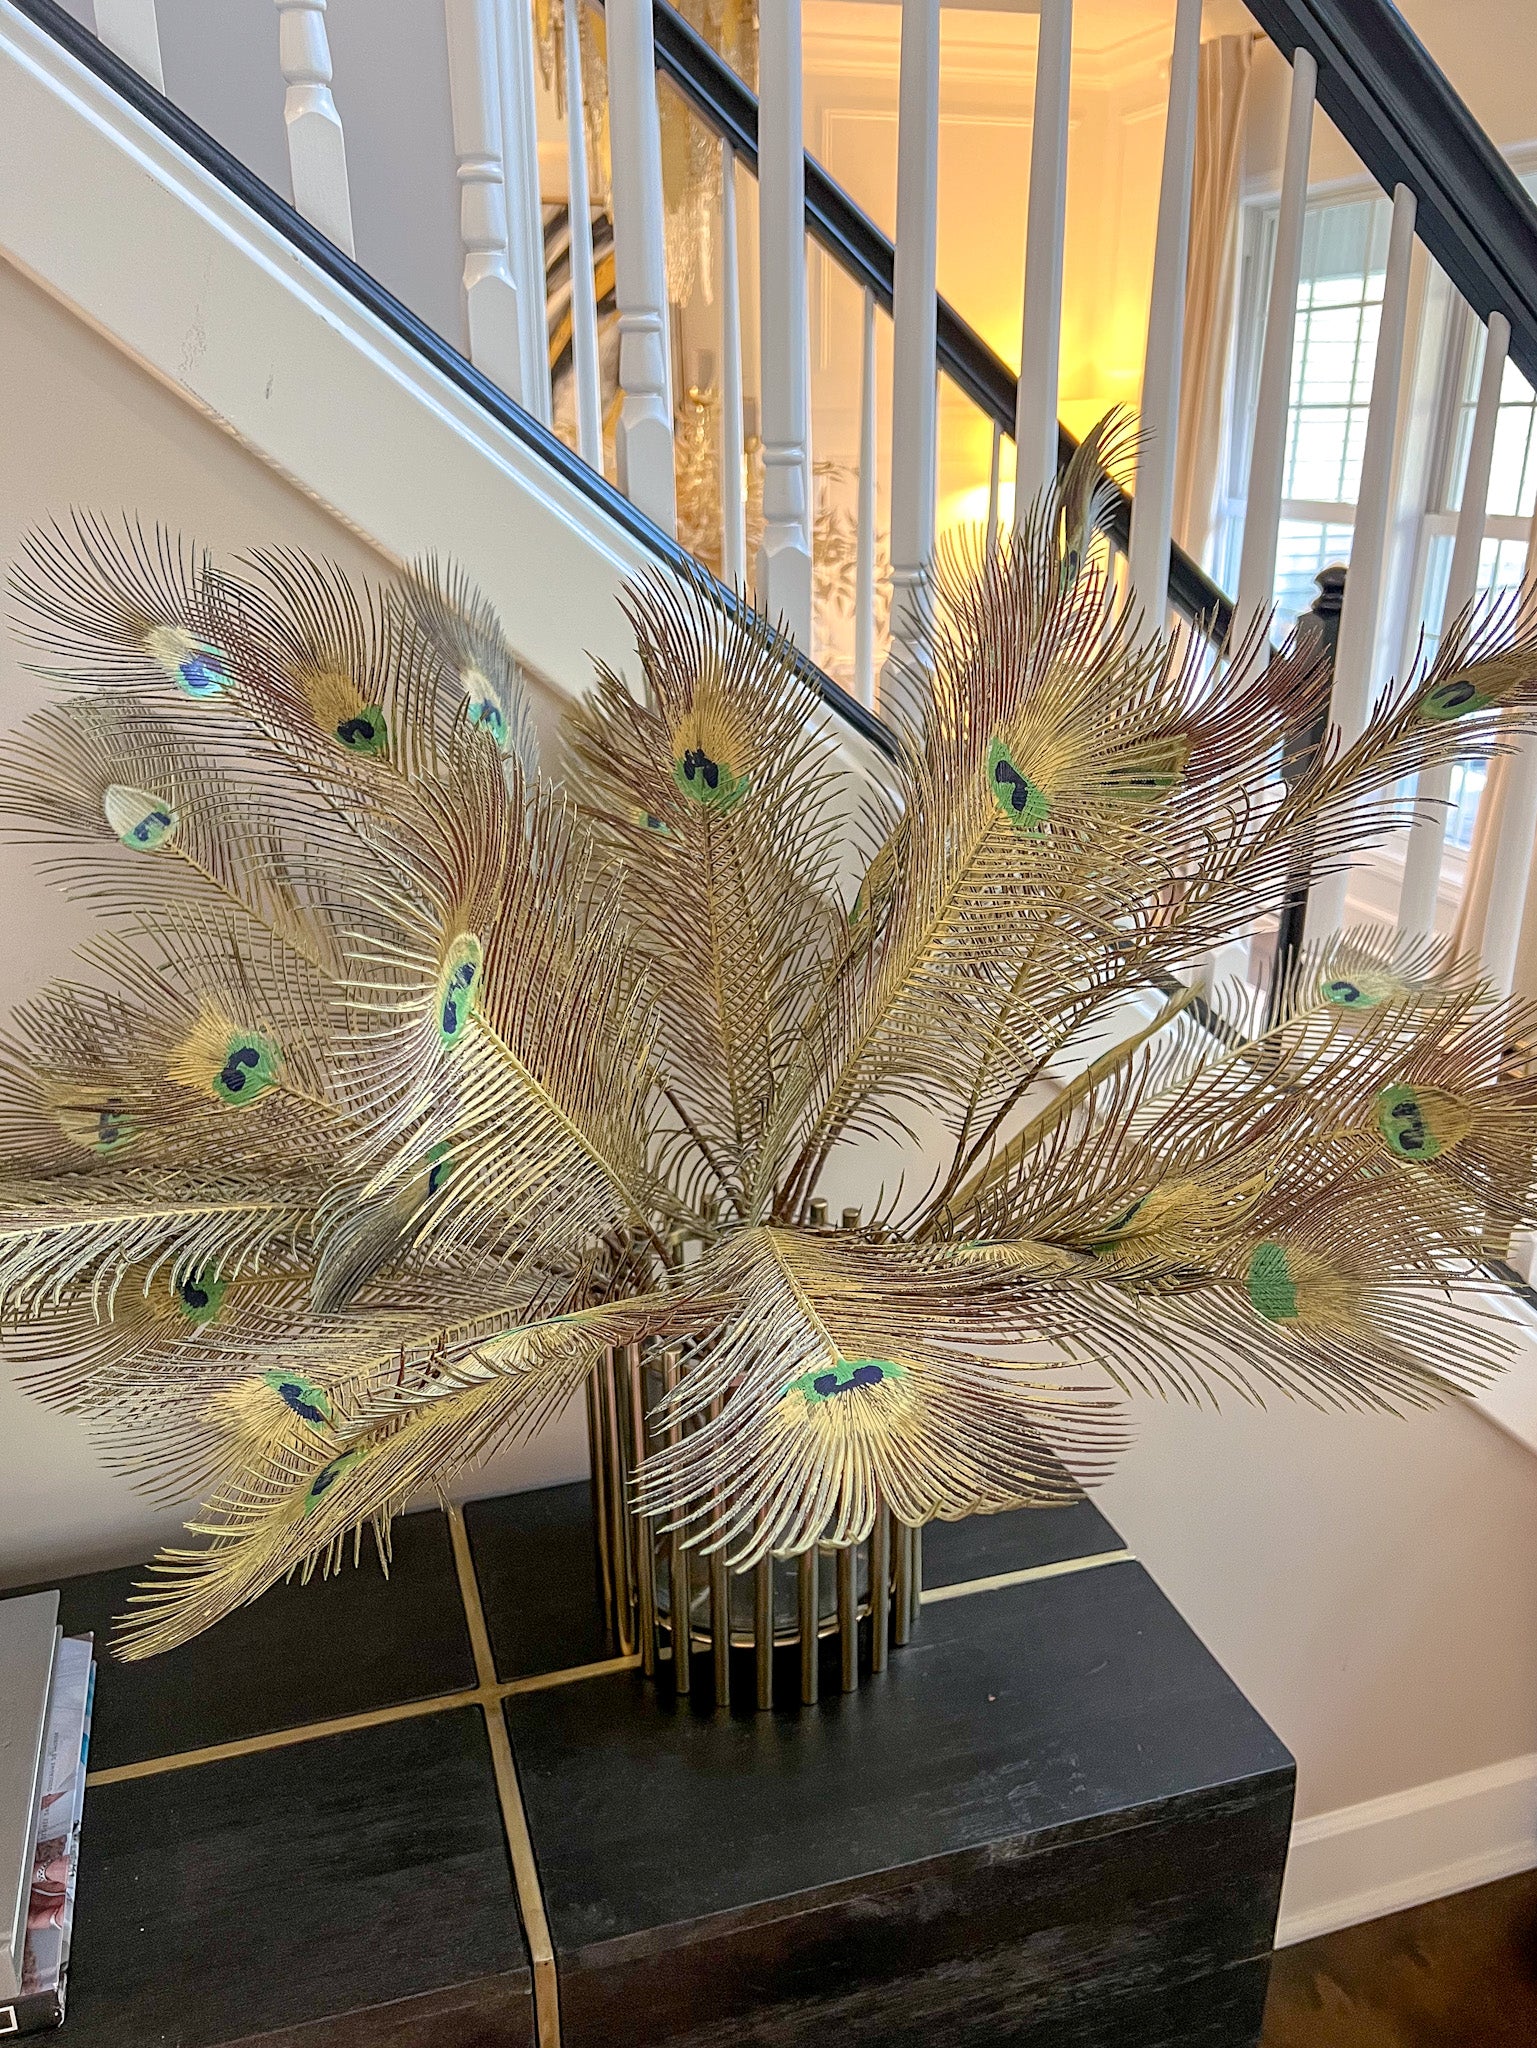 Gold Peacock Feather Stem (Pack of 3 Stems)